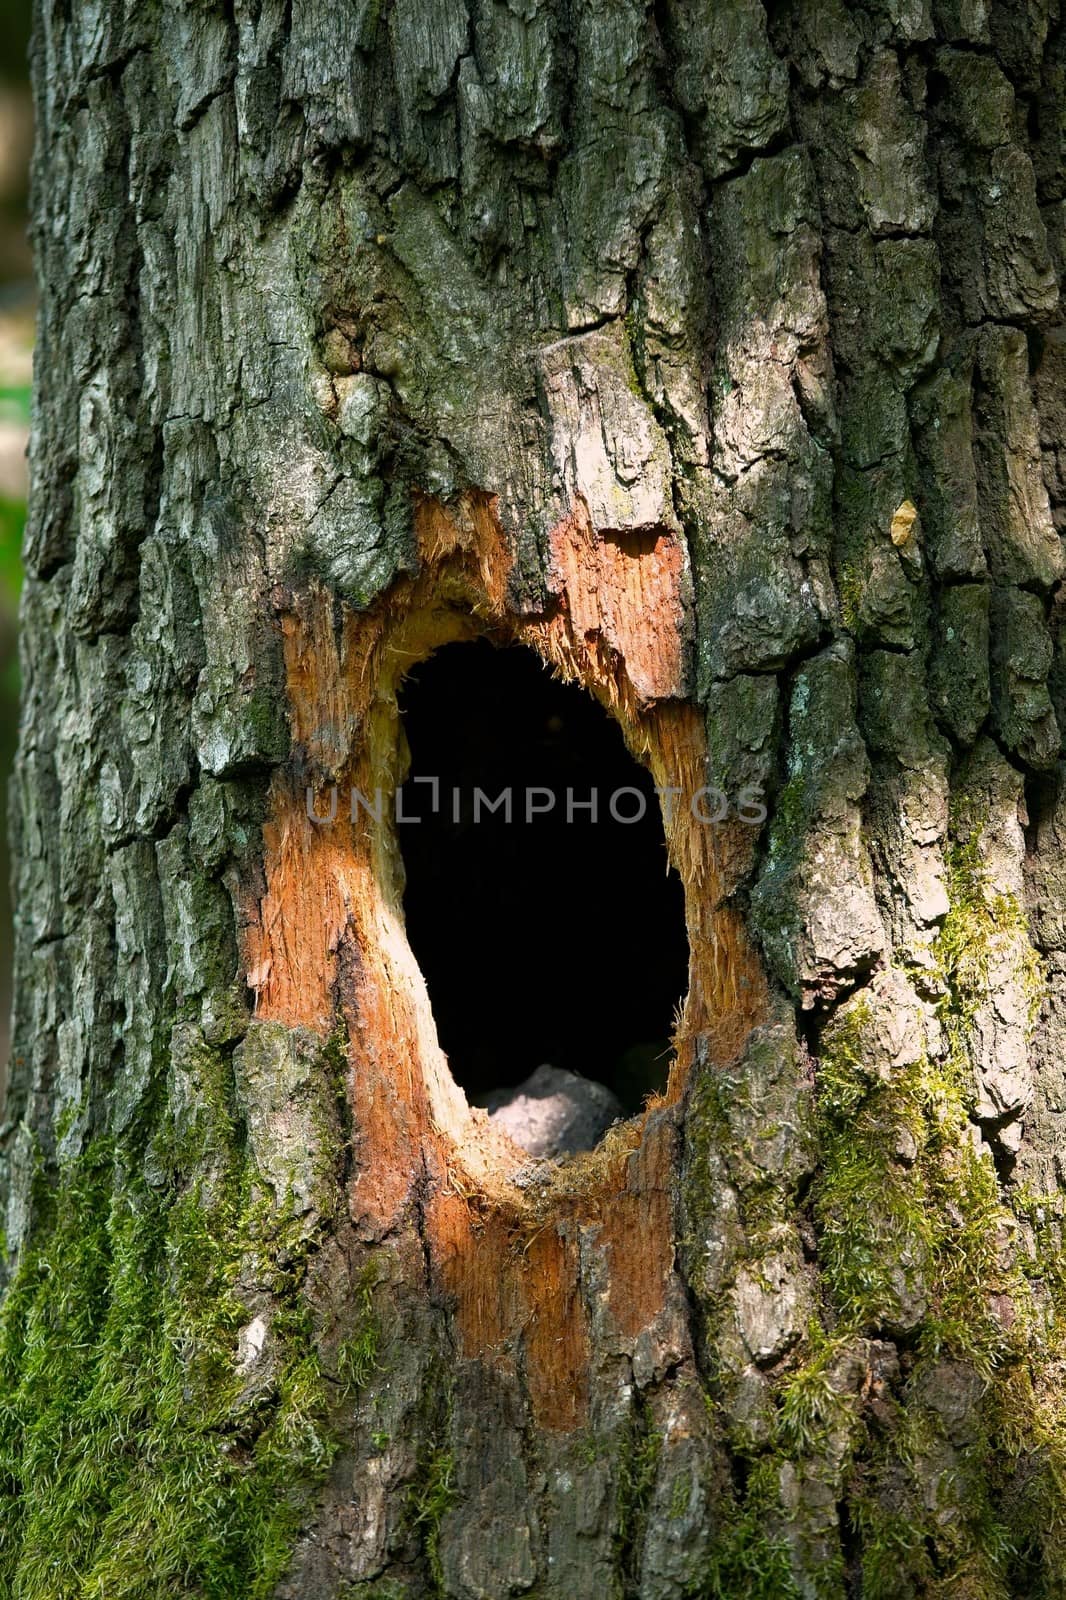 Animal's hole on a tree trunk